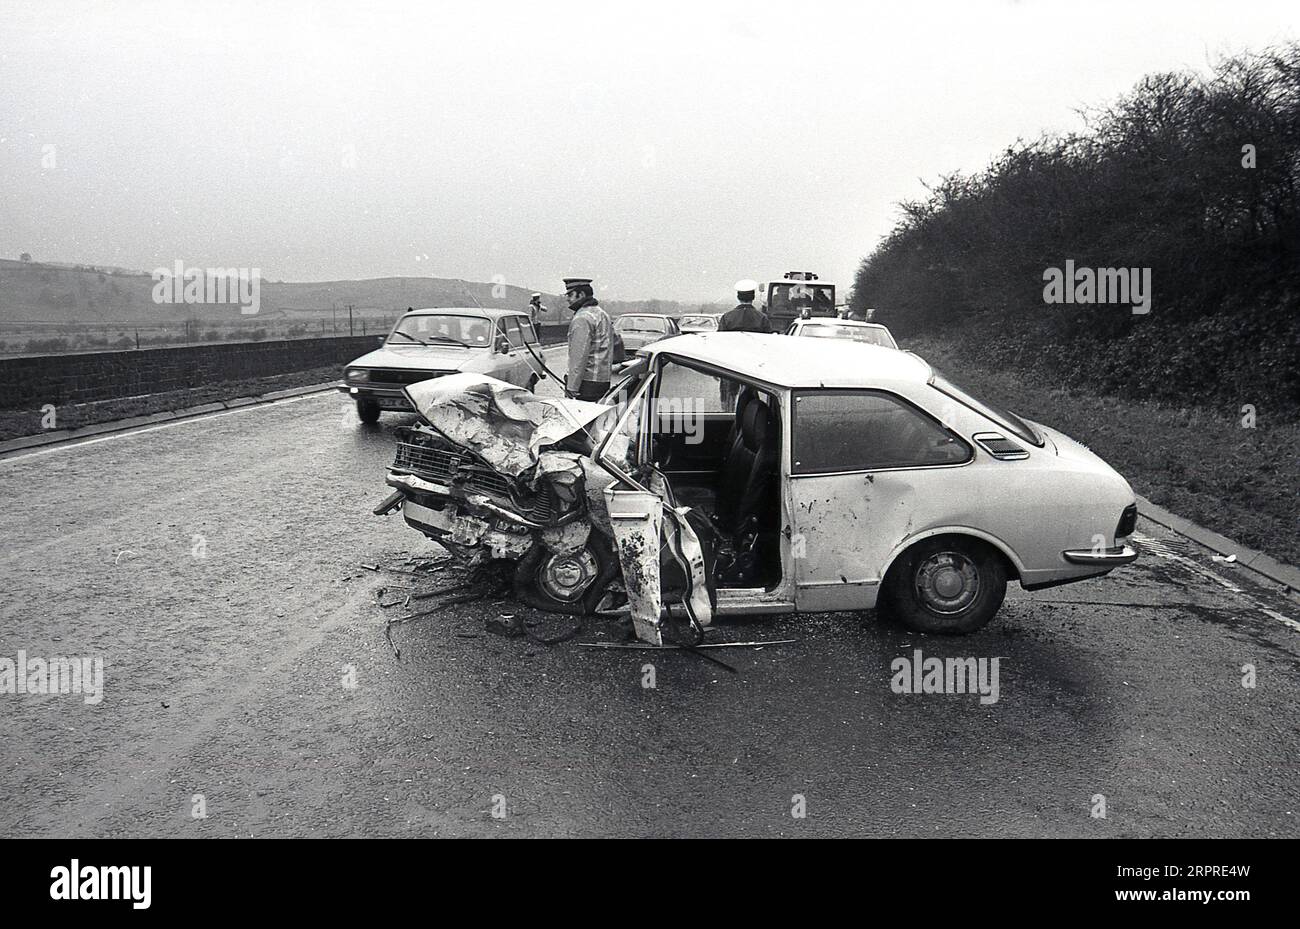 1983, historical, crashed car lying sideways in a road, police administering road traffic, Yorkshire, England, UK. Stock Photo